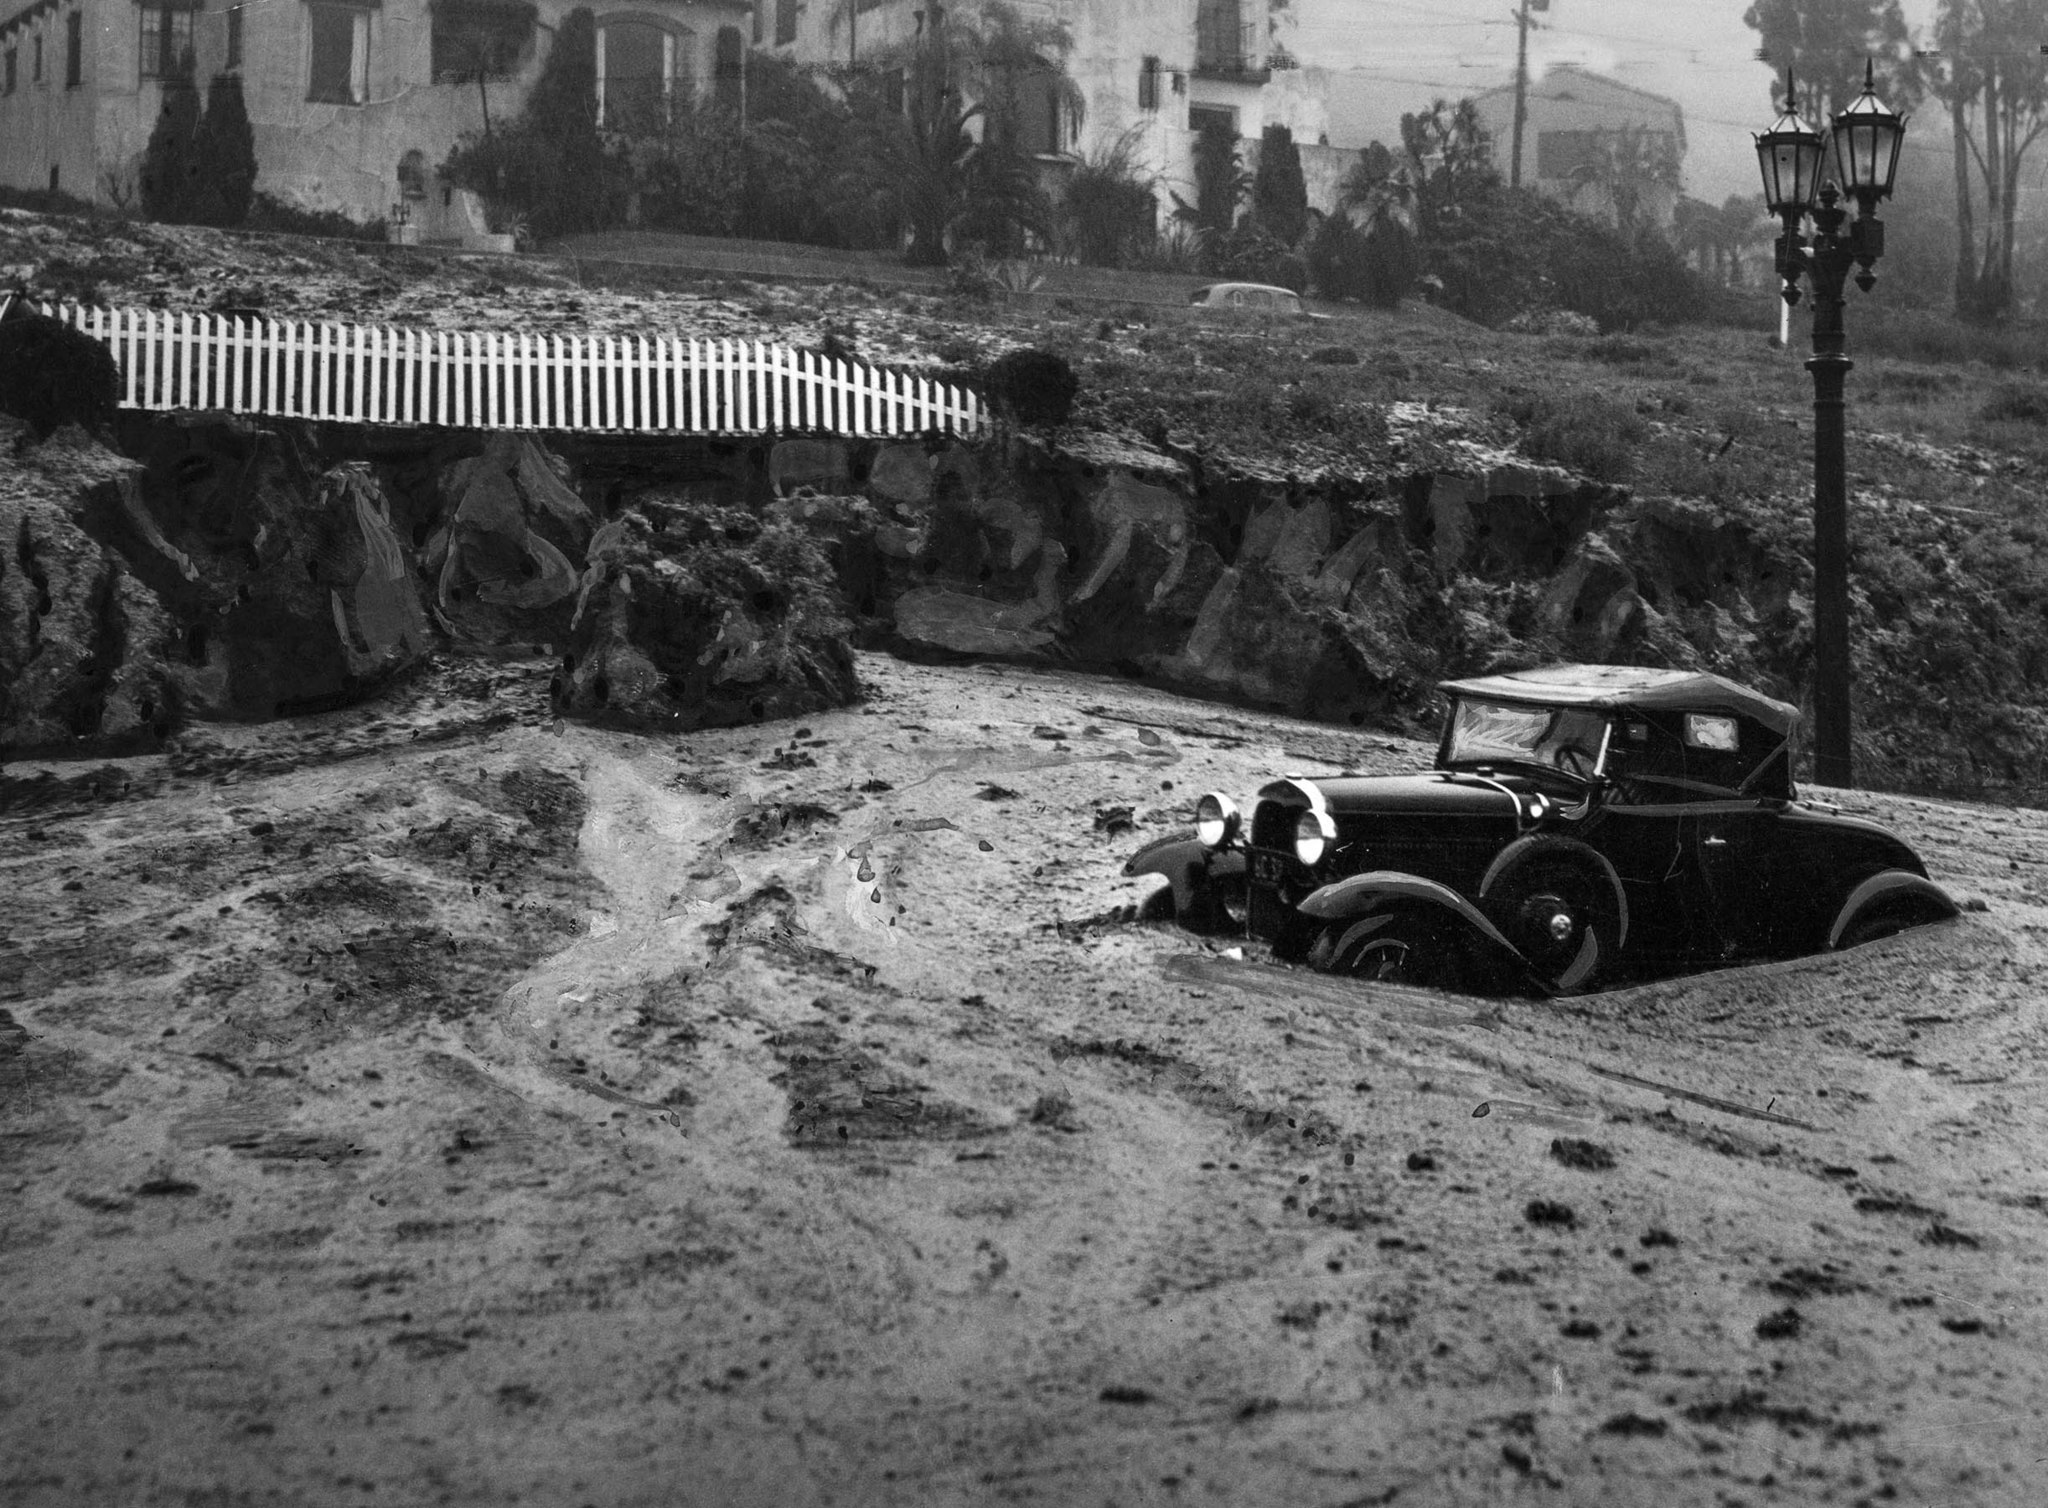 March 2, 1938: Mud slide at Harper Avenue and Sunset Boulevard caught this automobile and closed the